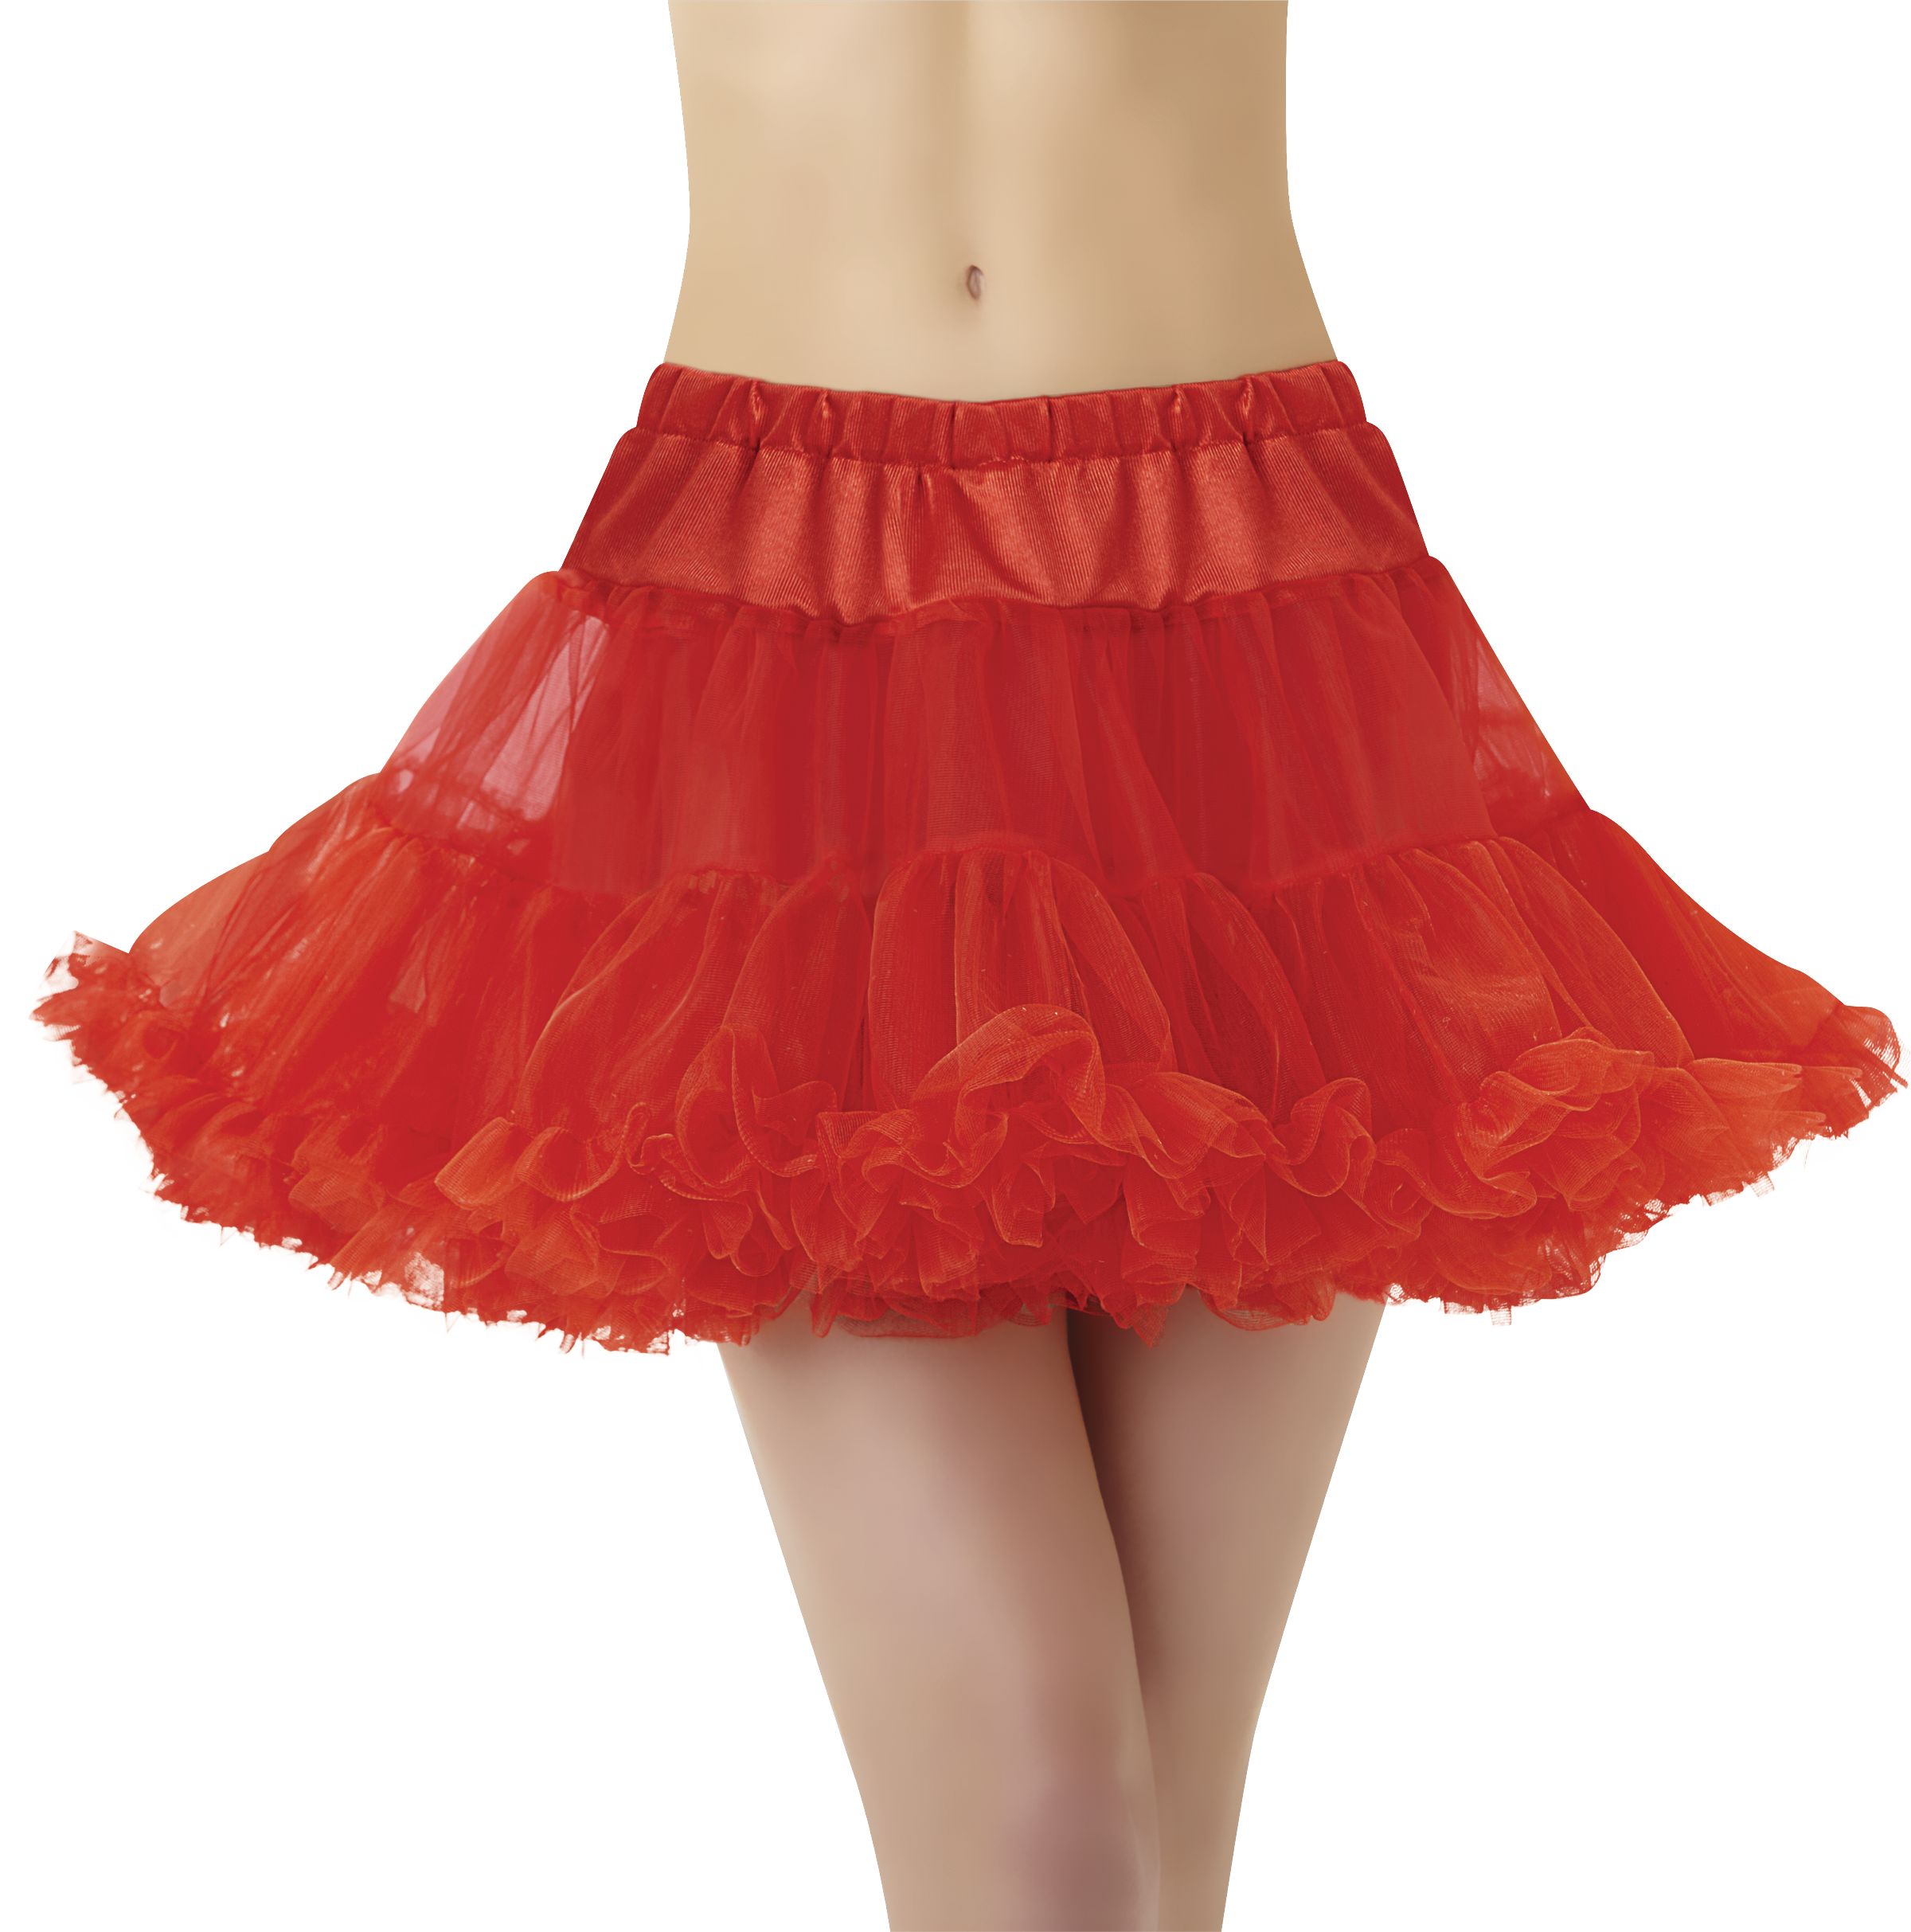 https://media-www.partycity.ca/product/seasonal-gardening/party-city-seasonal/party-city-halloween-and-fall-decor/8517358/adult-tulle-petticoat-16f23046-6bdc-4dbe-99c9-a6a1531ea2a5-jpgrendition.jpg